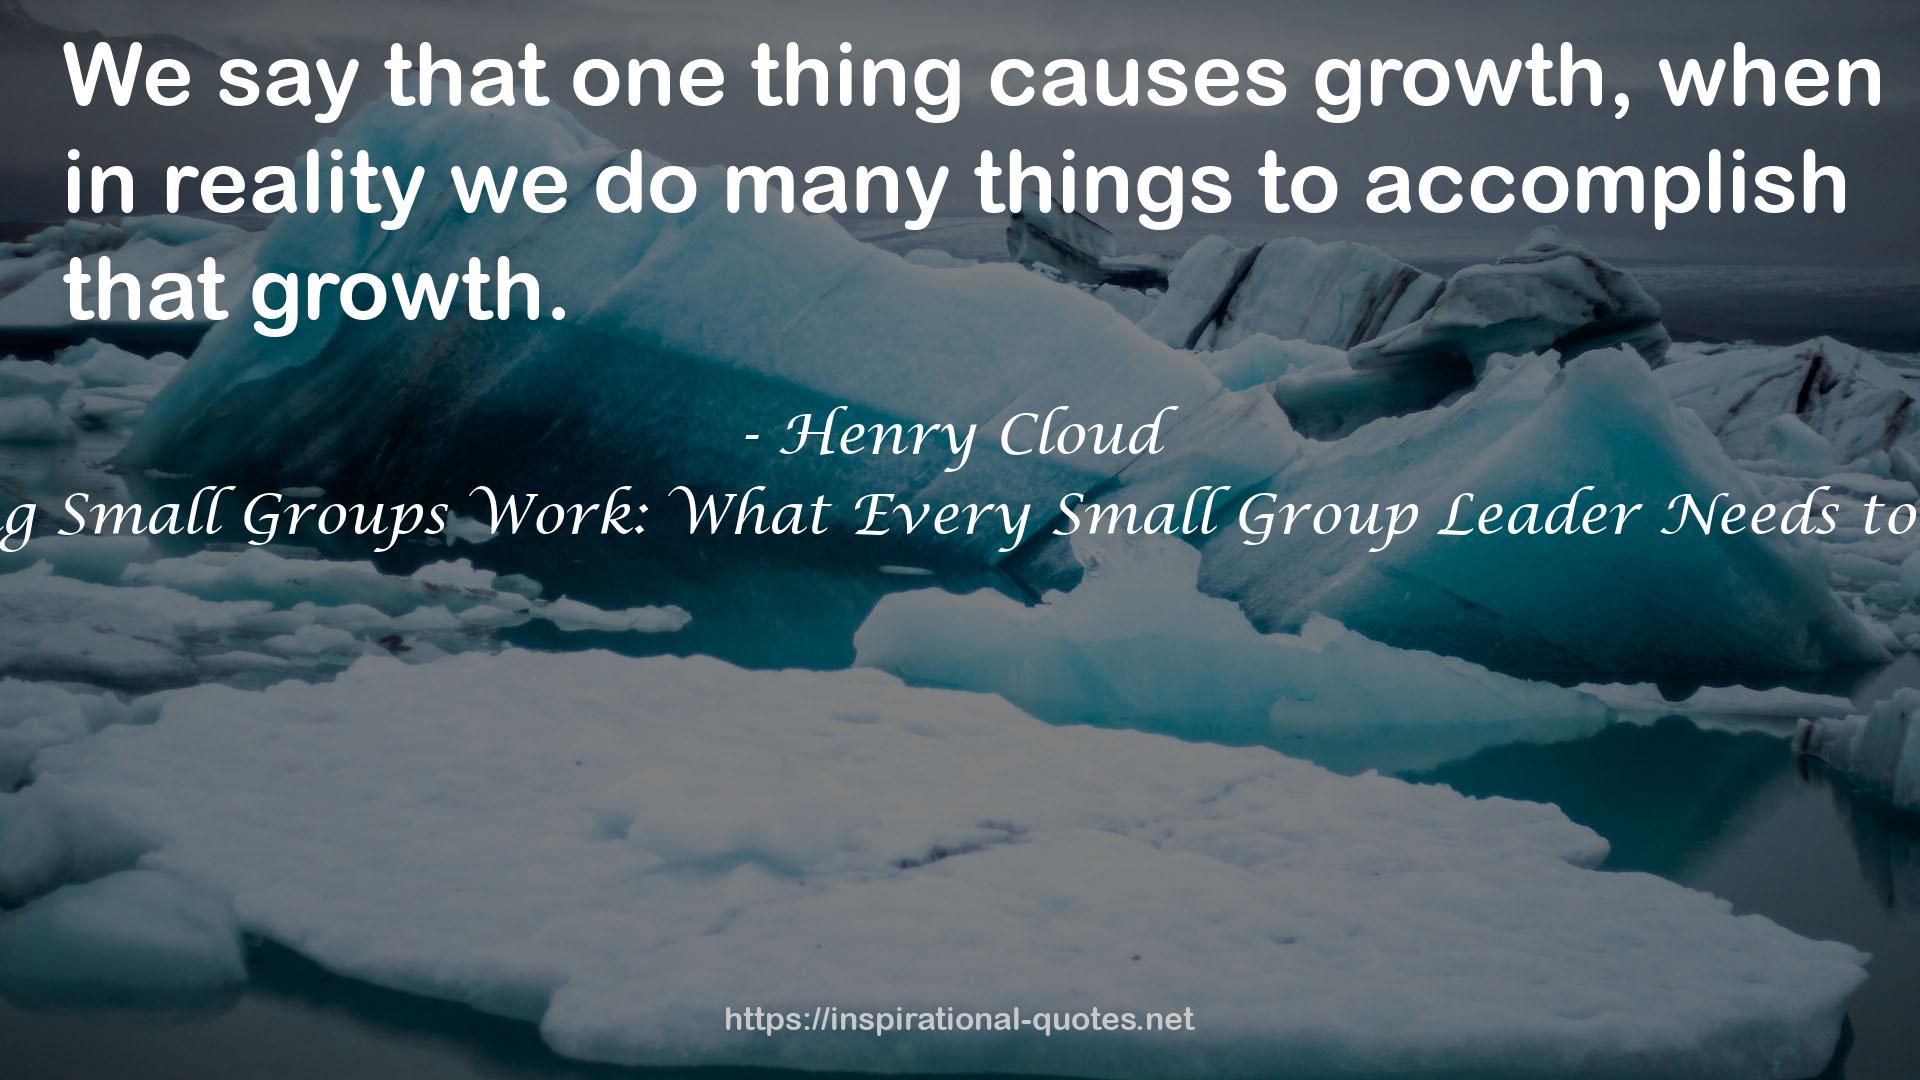 Making Small Groups Work: What Every Small Group Leader Needs to Know QUOTES